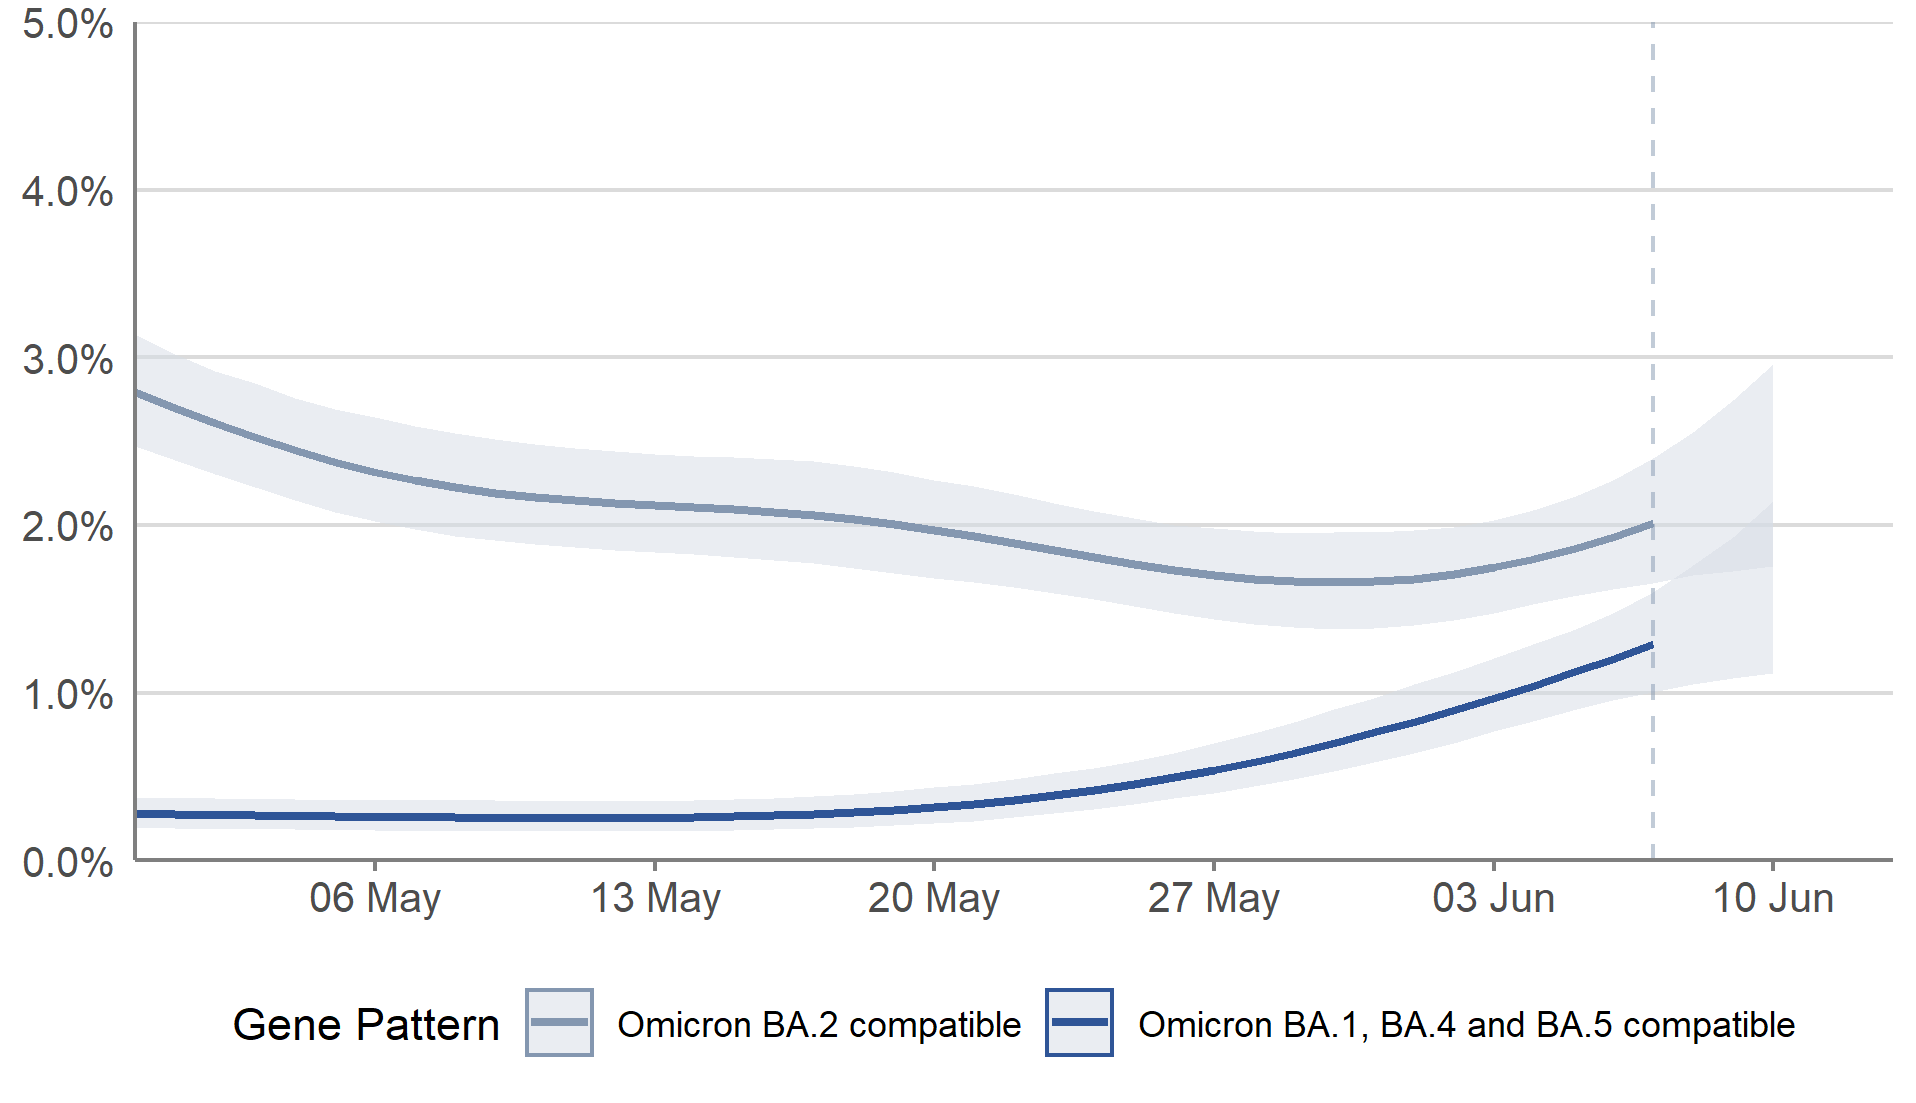 A line chart showing modelled daily estimates of the percentage of the population in Scotland testing positive for COVID-19 by variant, between 30 April and 10 June 2022. Modelled daily estimates are represented by two lines with 95% credible intervals in pale blue shading. The lines are blue for Omicron BA.1, BA.4 and BA.5 compatible infections and grey for Omicron BA.2 compatible infections. A vertical dashed line near the end of the series indicating greater uncertainty in estimates for the last three reported days. The percentage of people testing positive for COVID-19 compatible with Omicron BA.1, BA.4 and BA.5 increased in the most recent week. The percentage of people testing positive for COVID-19 compatible with Omicron BA.2 also increased.